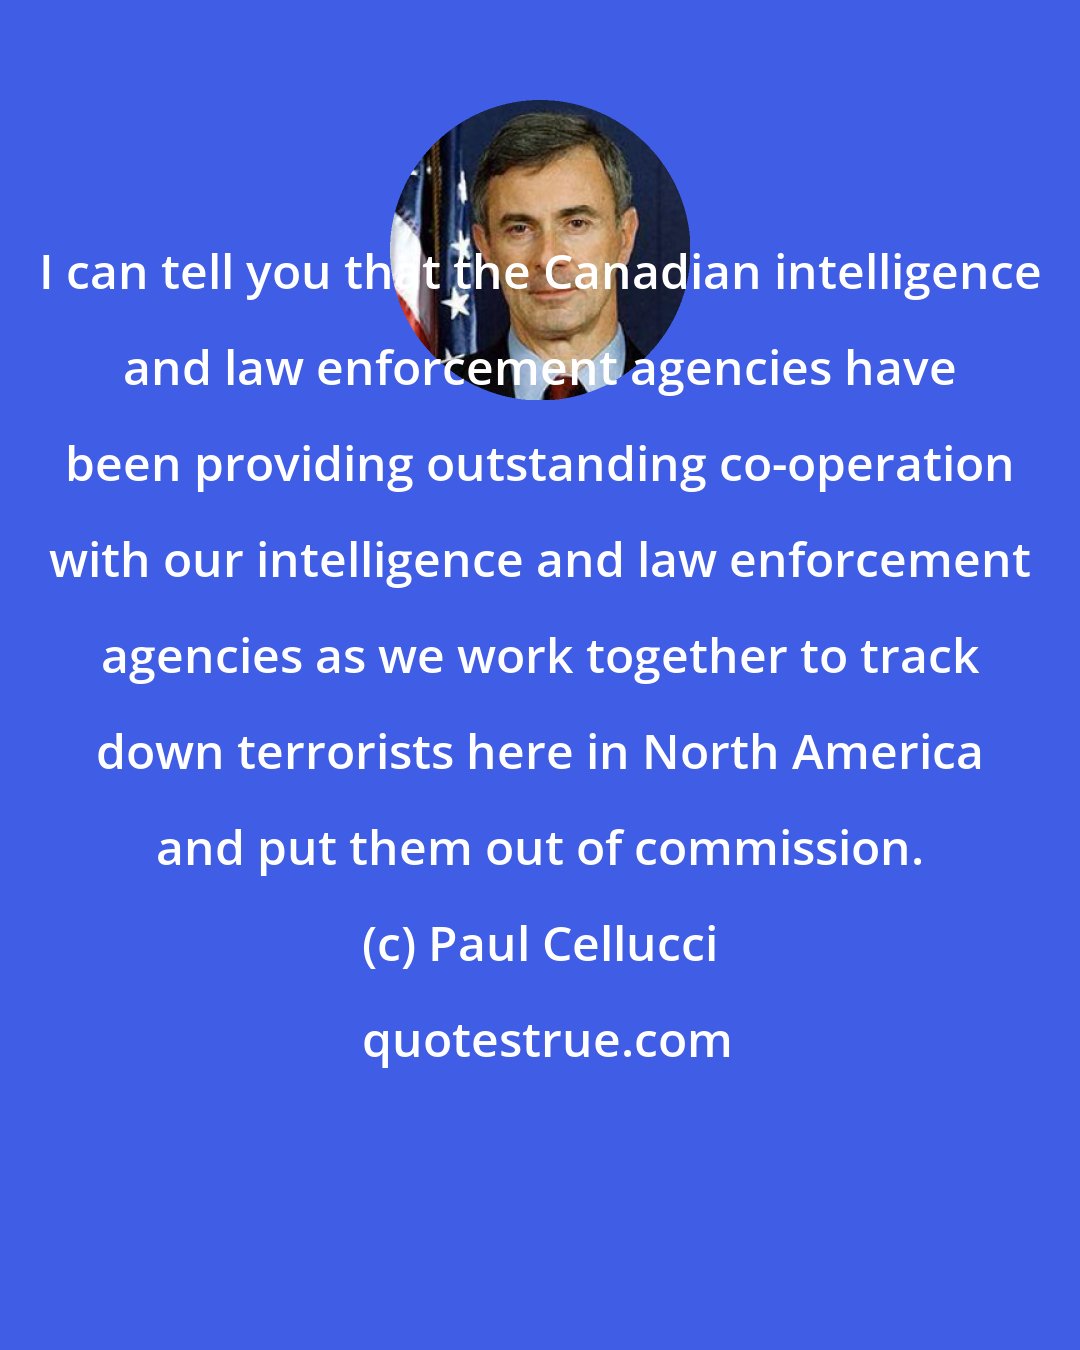 Paul Cellucci: I can tell you that the Canadian intelligence and law enforcement agencies have been providing outstanding co-operation with our intelligence and law enforcement agencies as we work together to track down terrorists here in North America and put them out of commission.